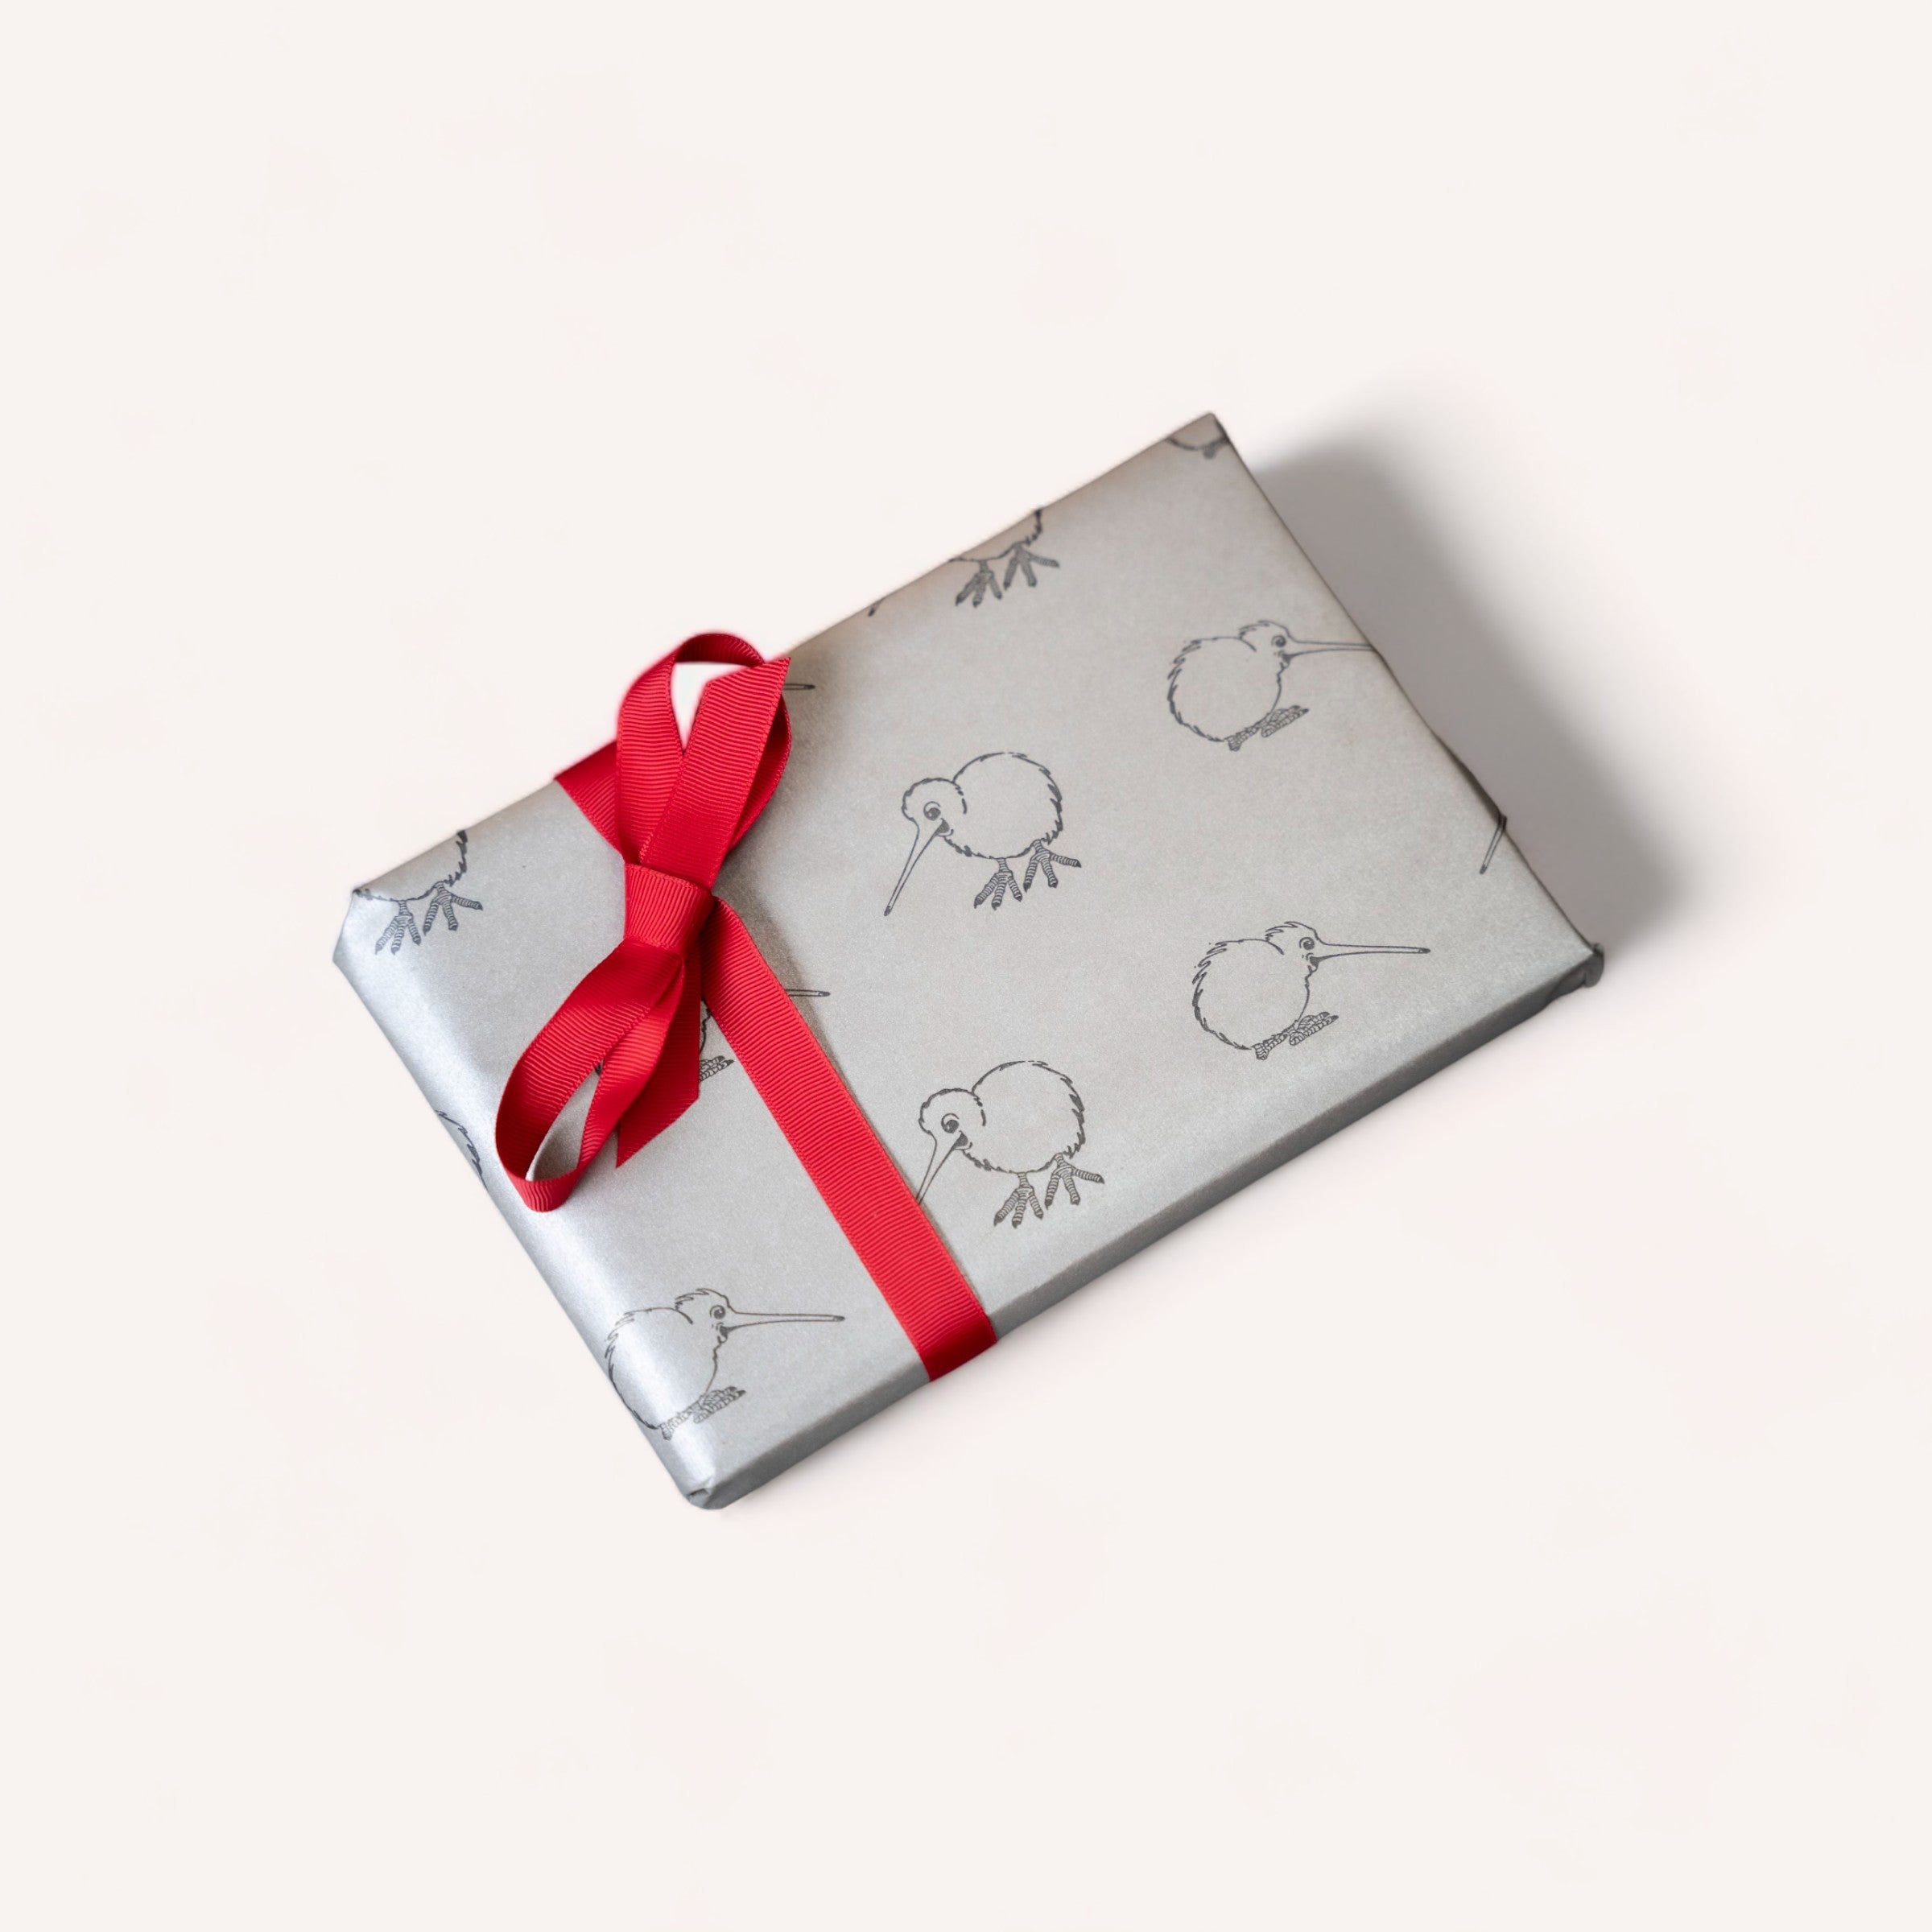 A neatly wrapped gift with a red ribbon on a simple background, showcasing a pattern with whimsical line-drawn birds on premium 65gsm giftbox co. paper.